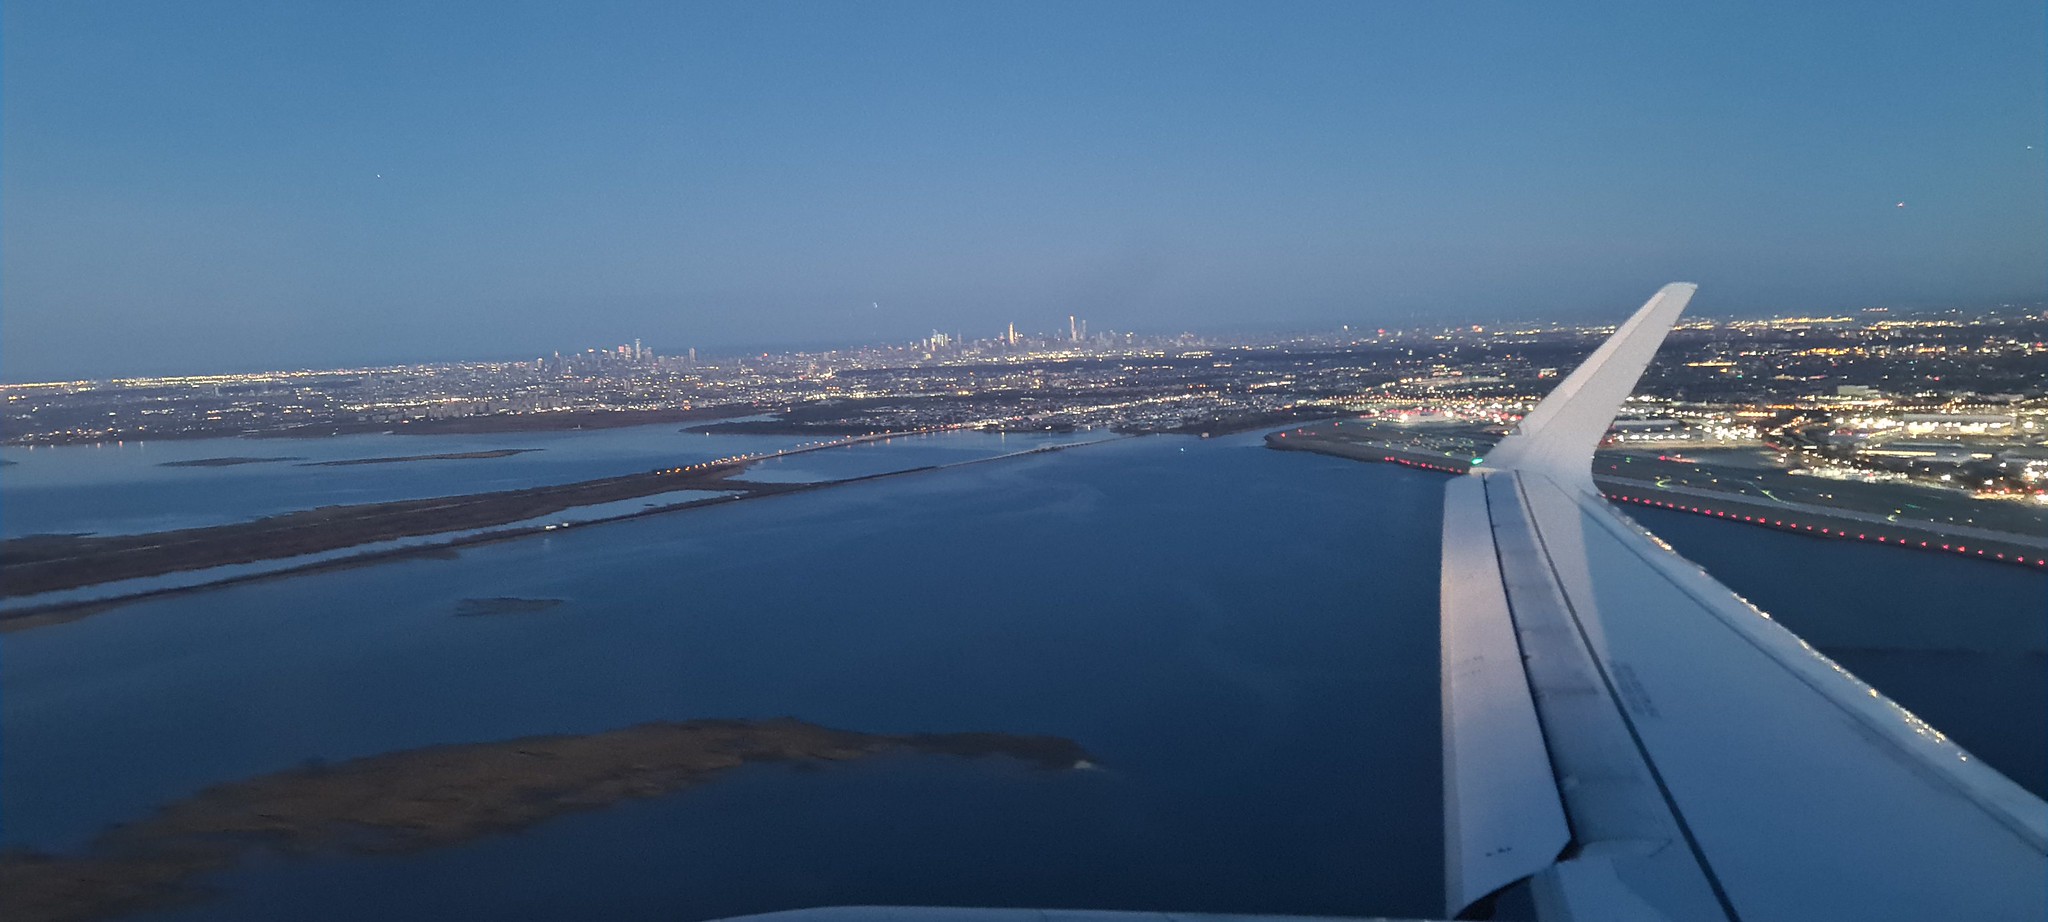 Looking back at New York on my way to Los Angeles LAX